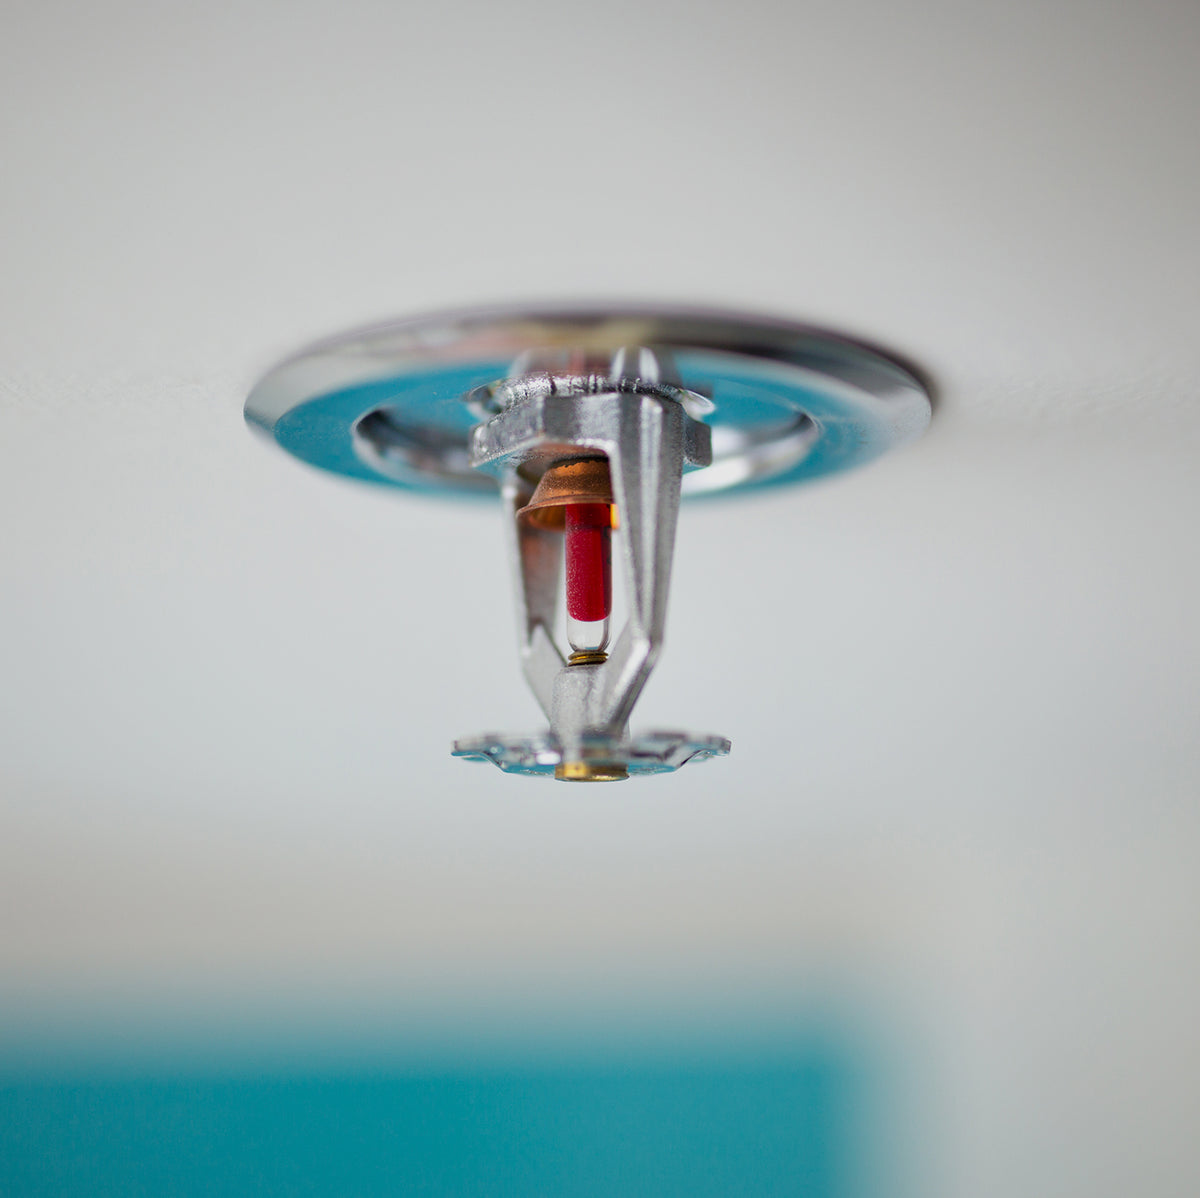 WHEN TO REPAIR OR REPLACE YOUR FIRE SPRINKLER SYSTEM